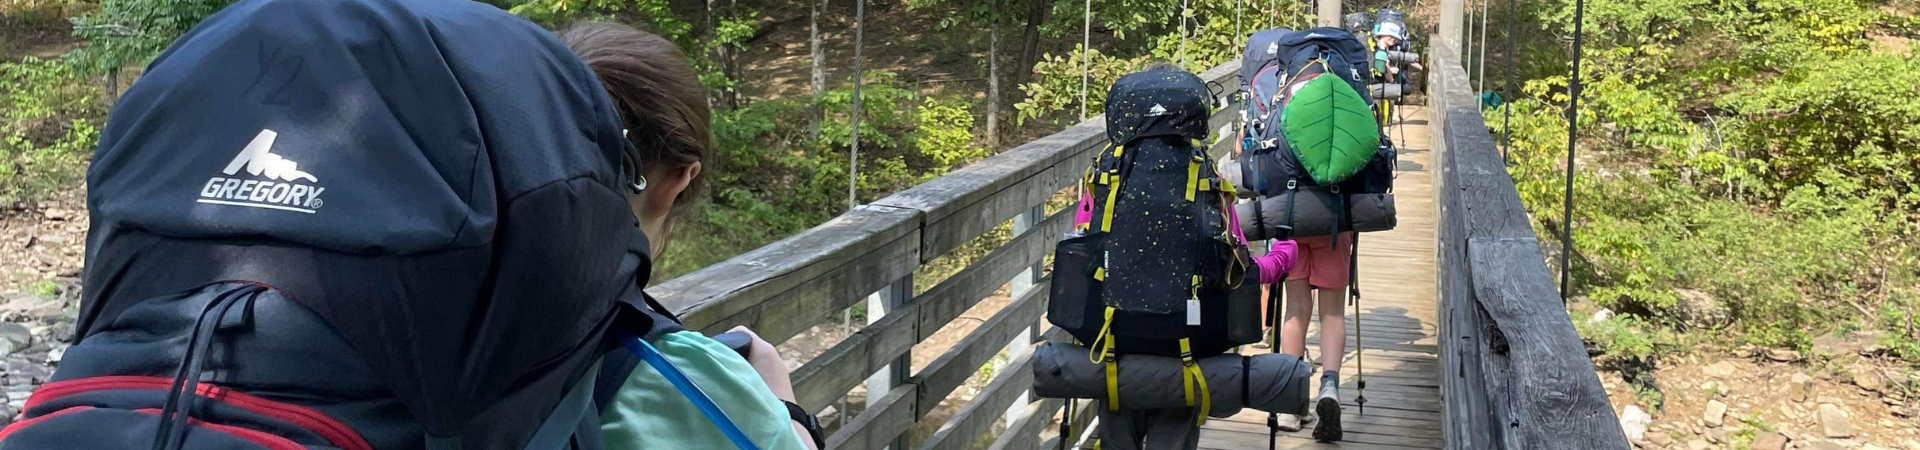  Group hiking away from camera across a bridge with a lot of backpacking gear 